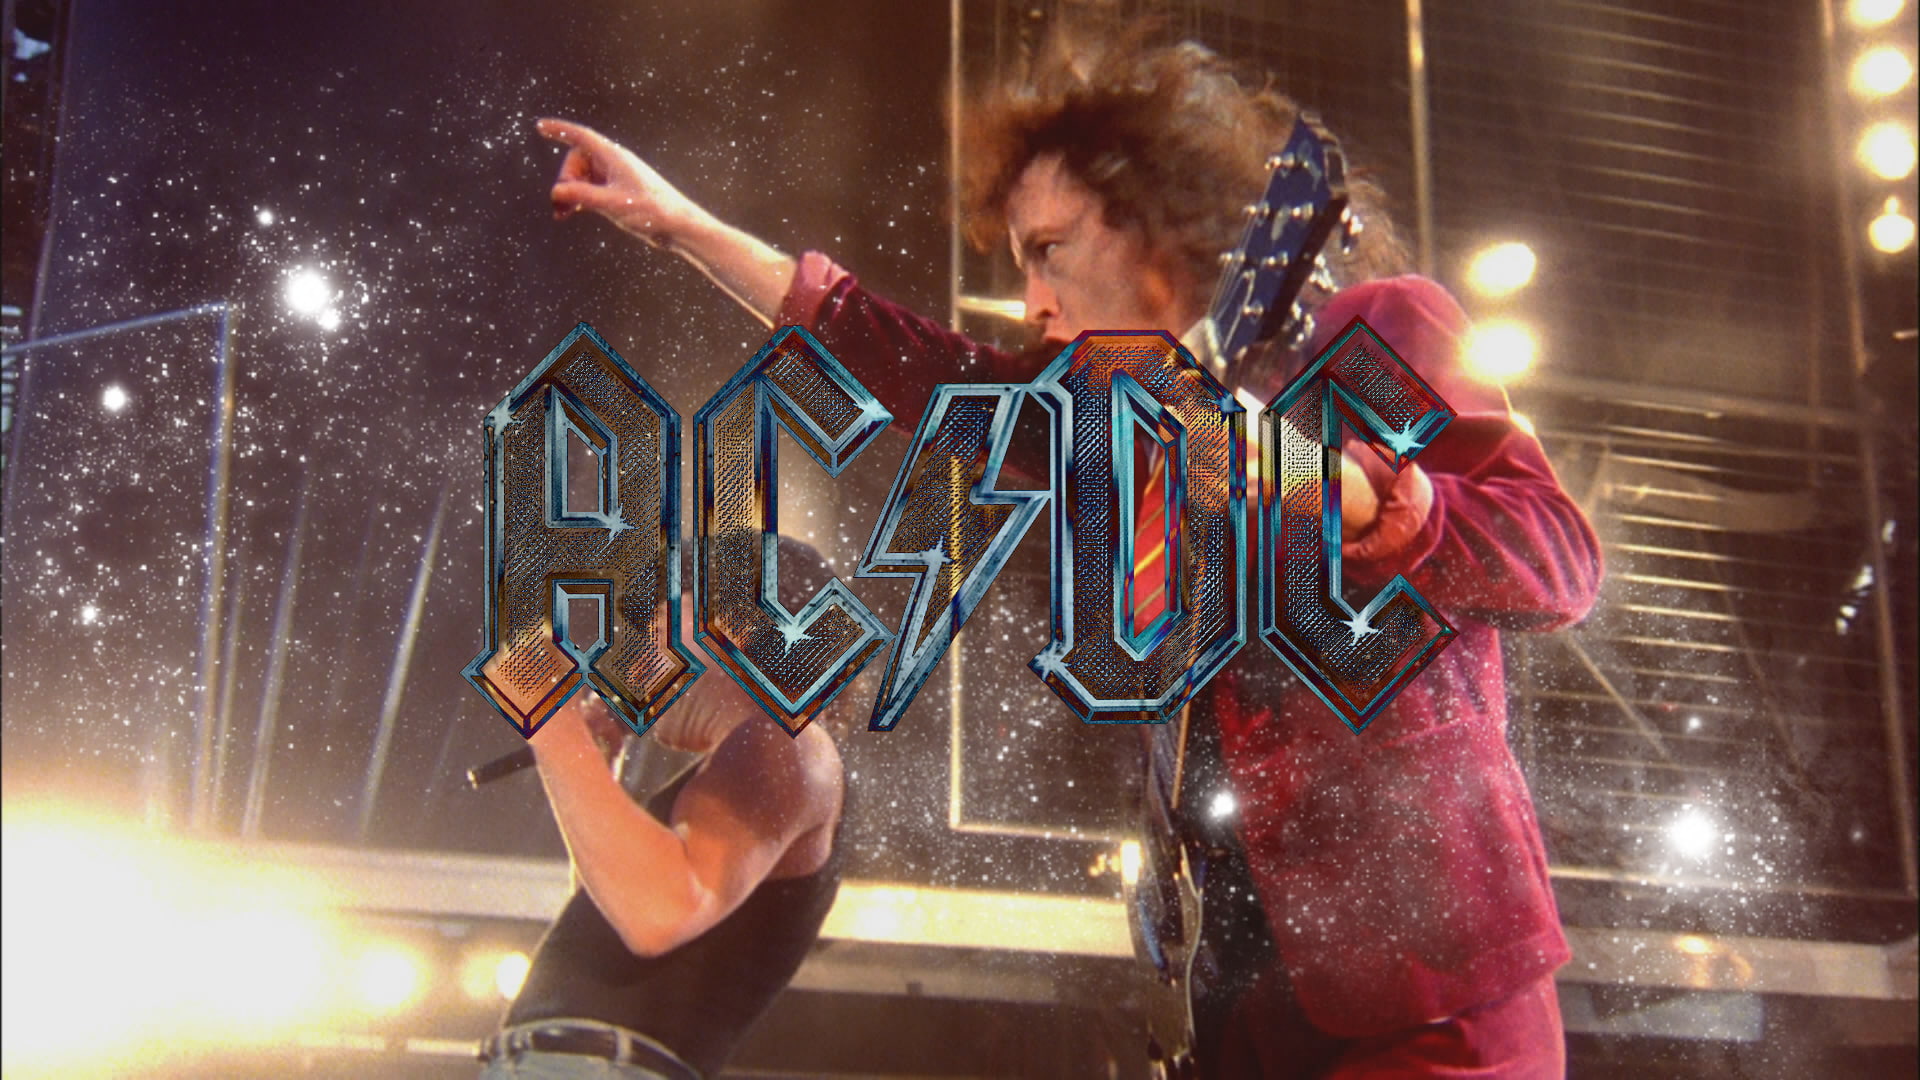 ac dc, acdc, bands, classic, concert, entertainment, groups